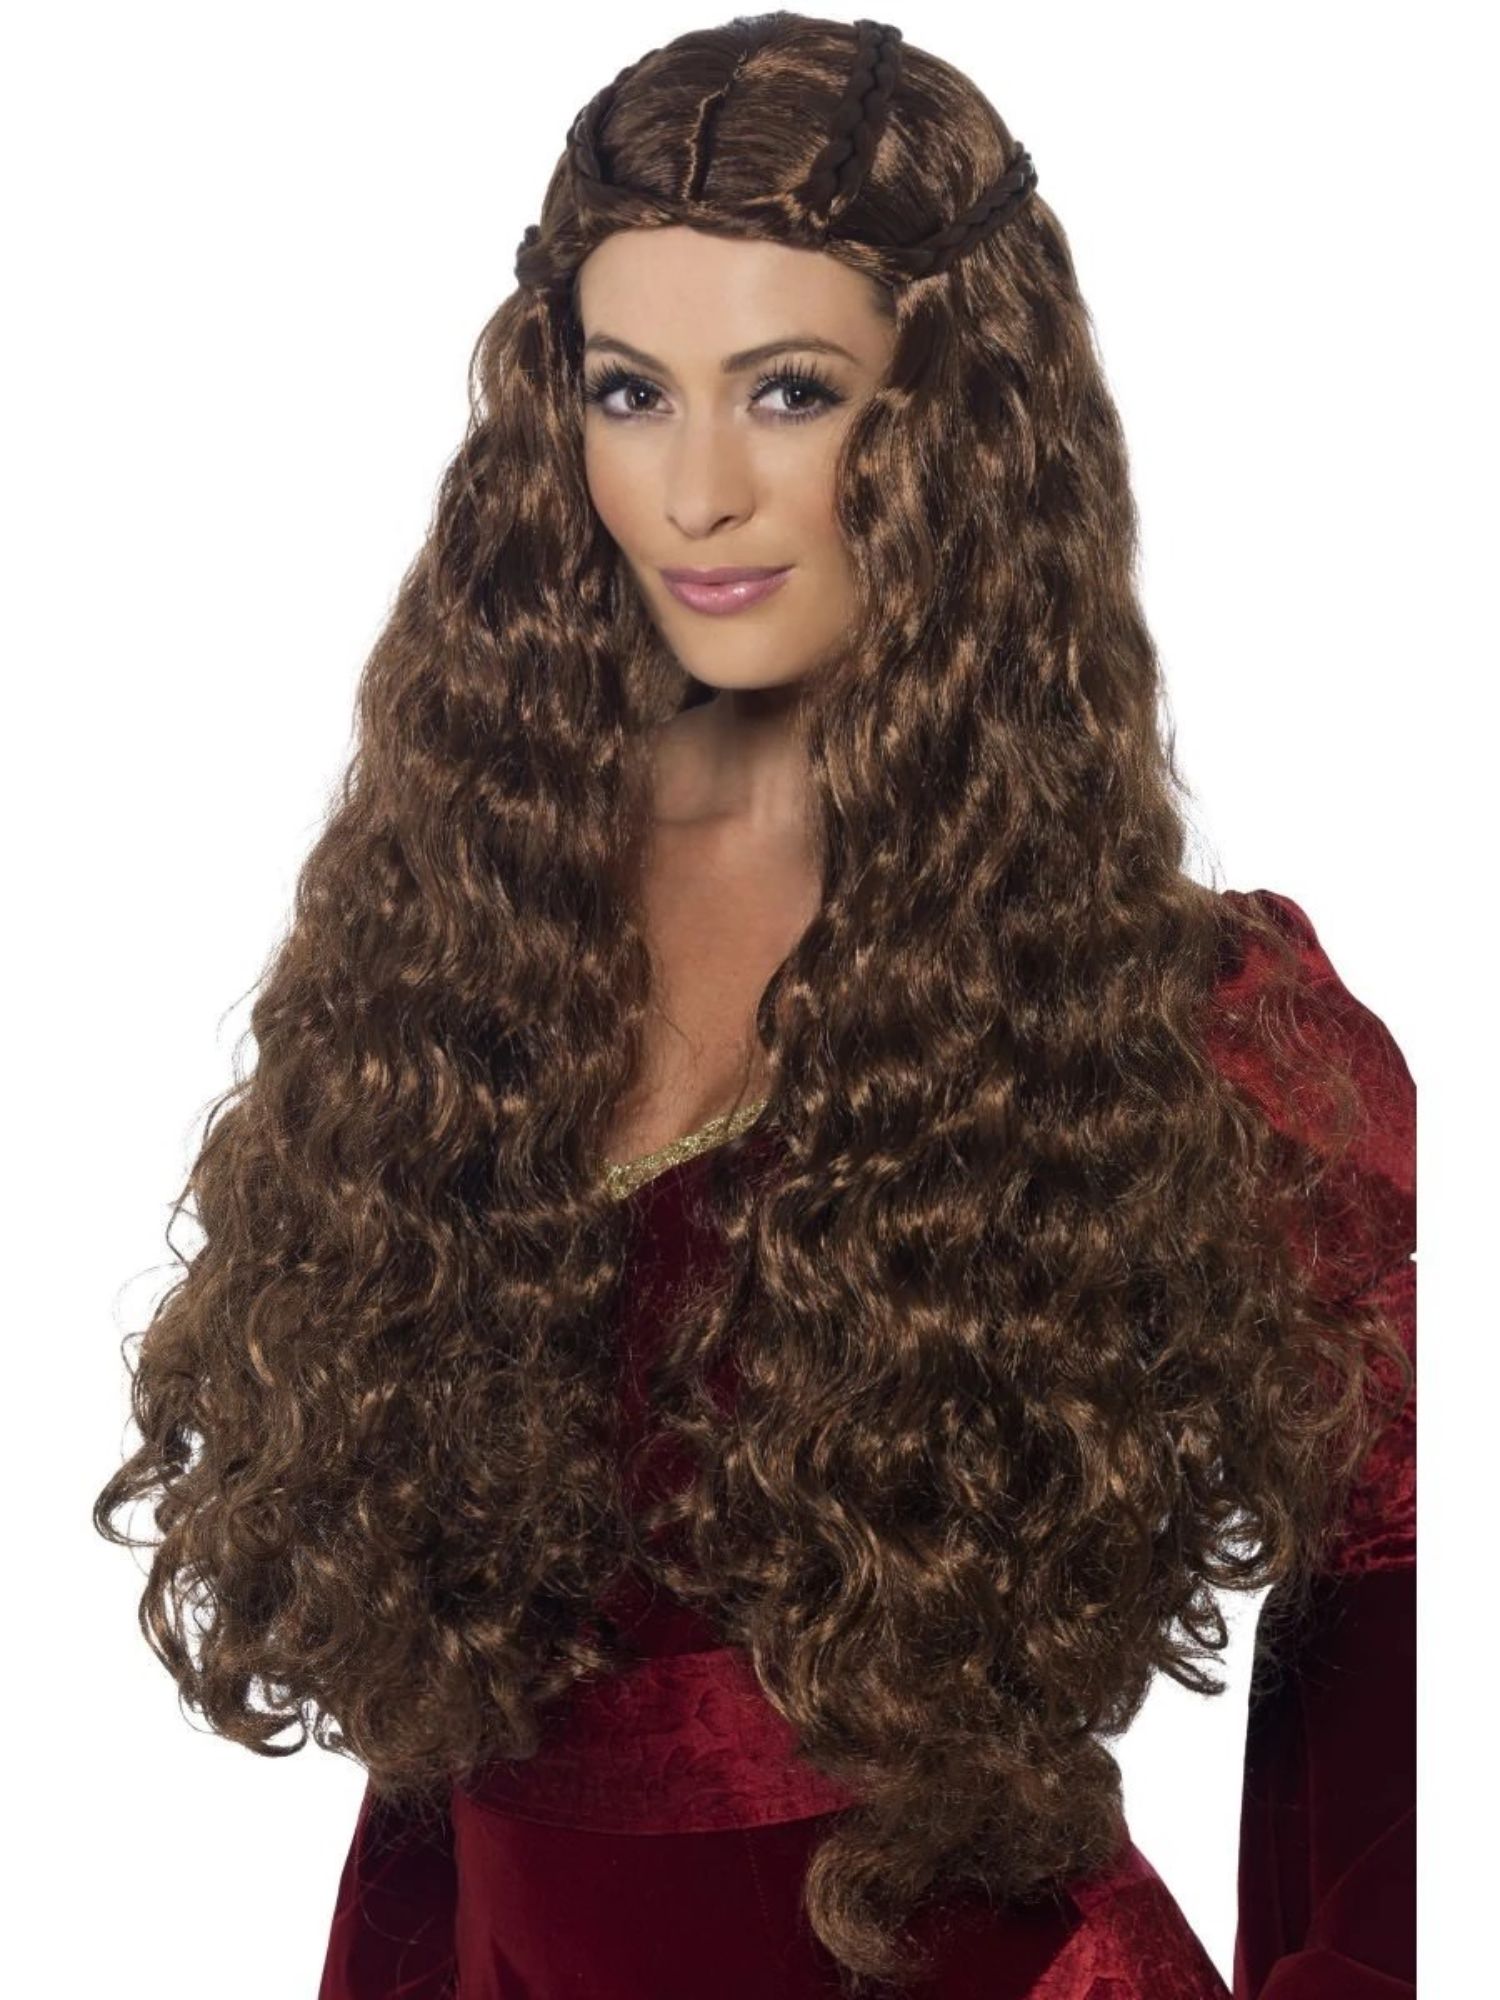 Smiffys 26" Brown Historical Medieval Princess Extra Long Women Adult Halloween Wig Costume Accessory - One Size